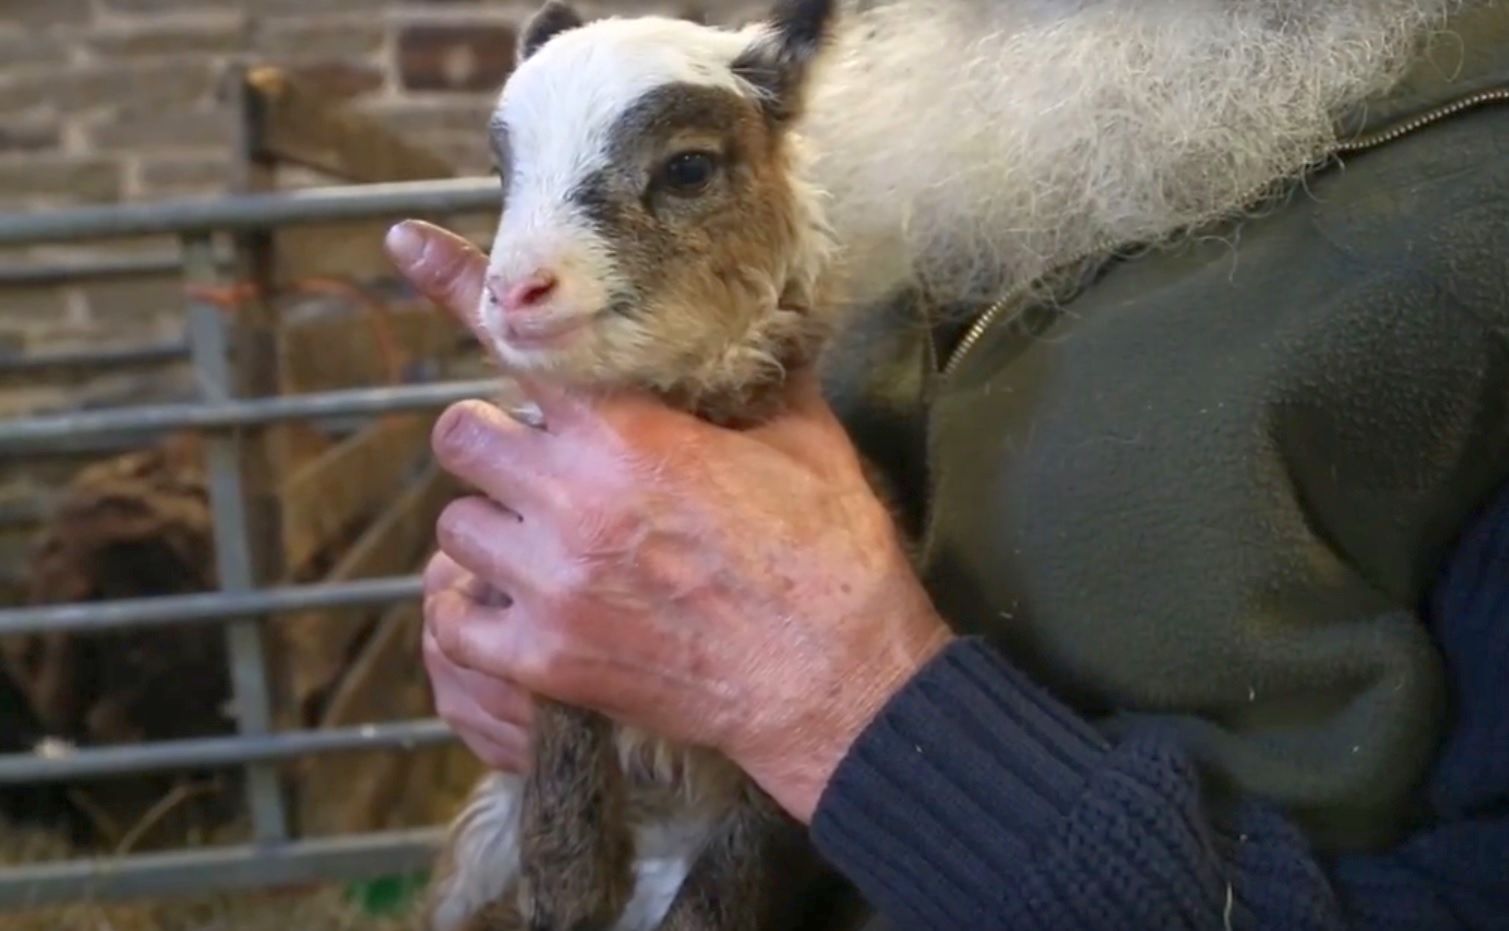 The couple said they had never seen lambs this early ever before and that it was a “real surprise”